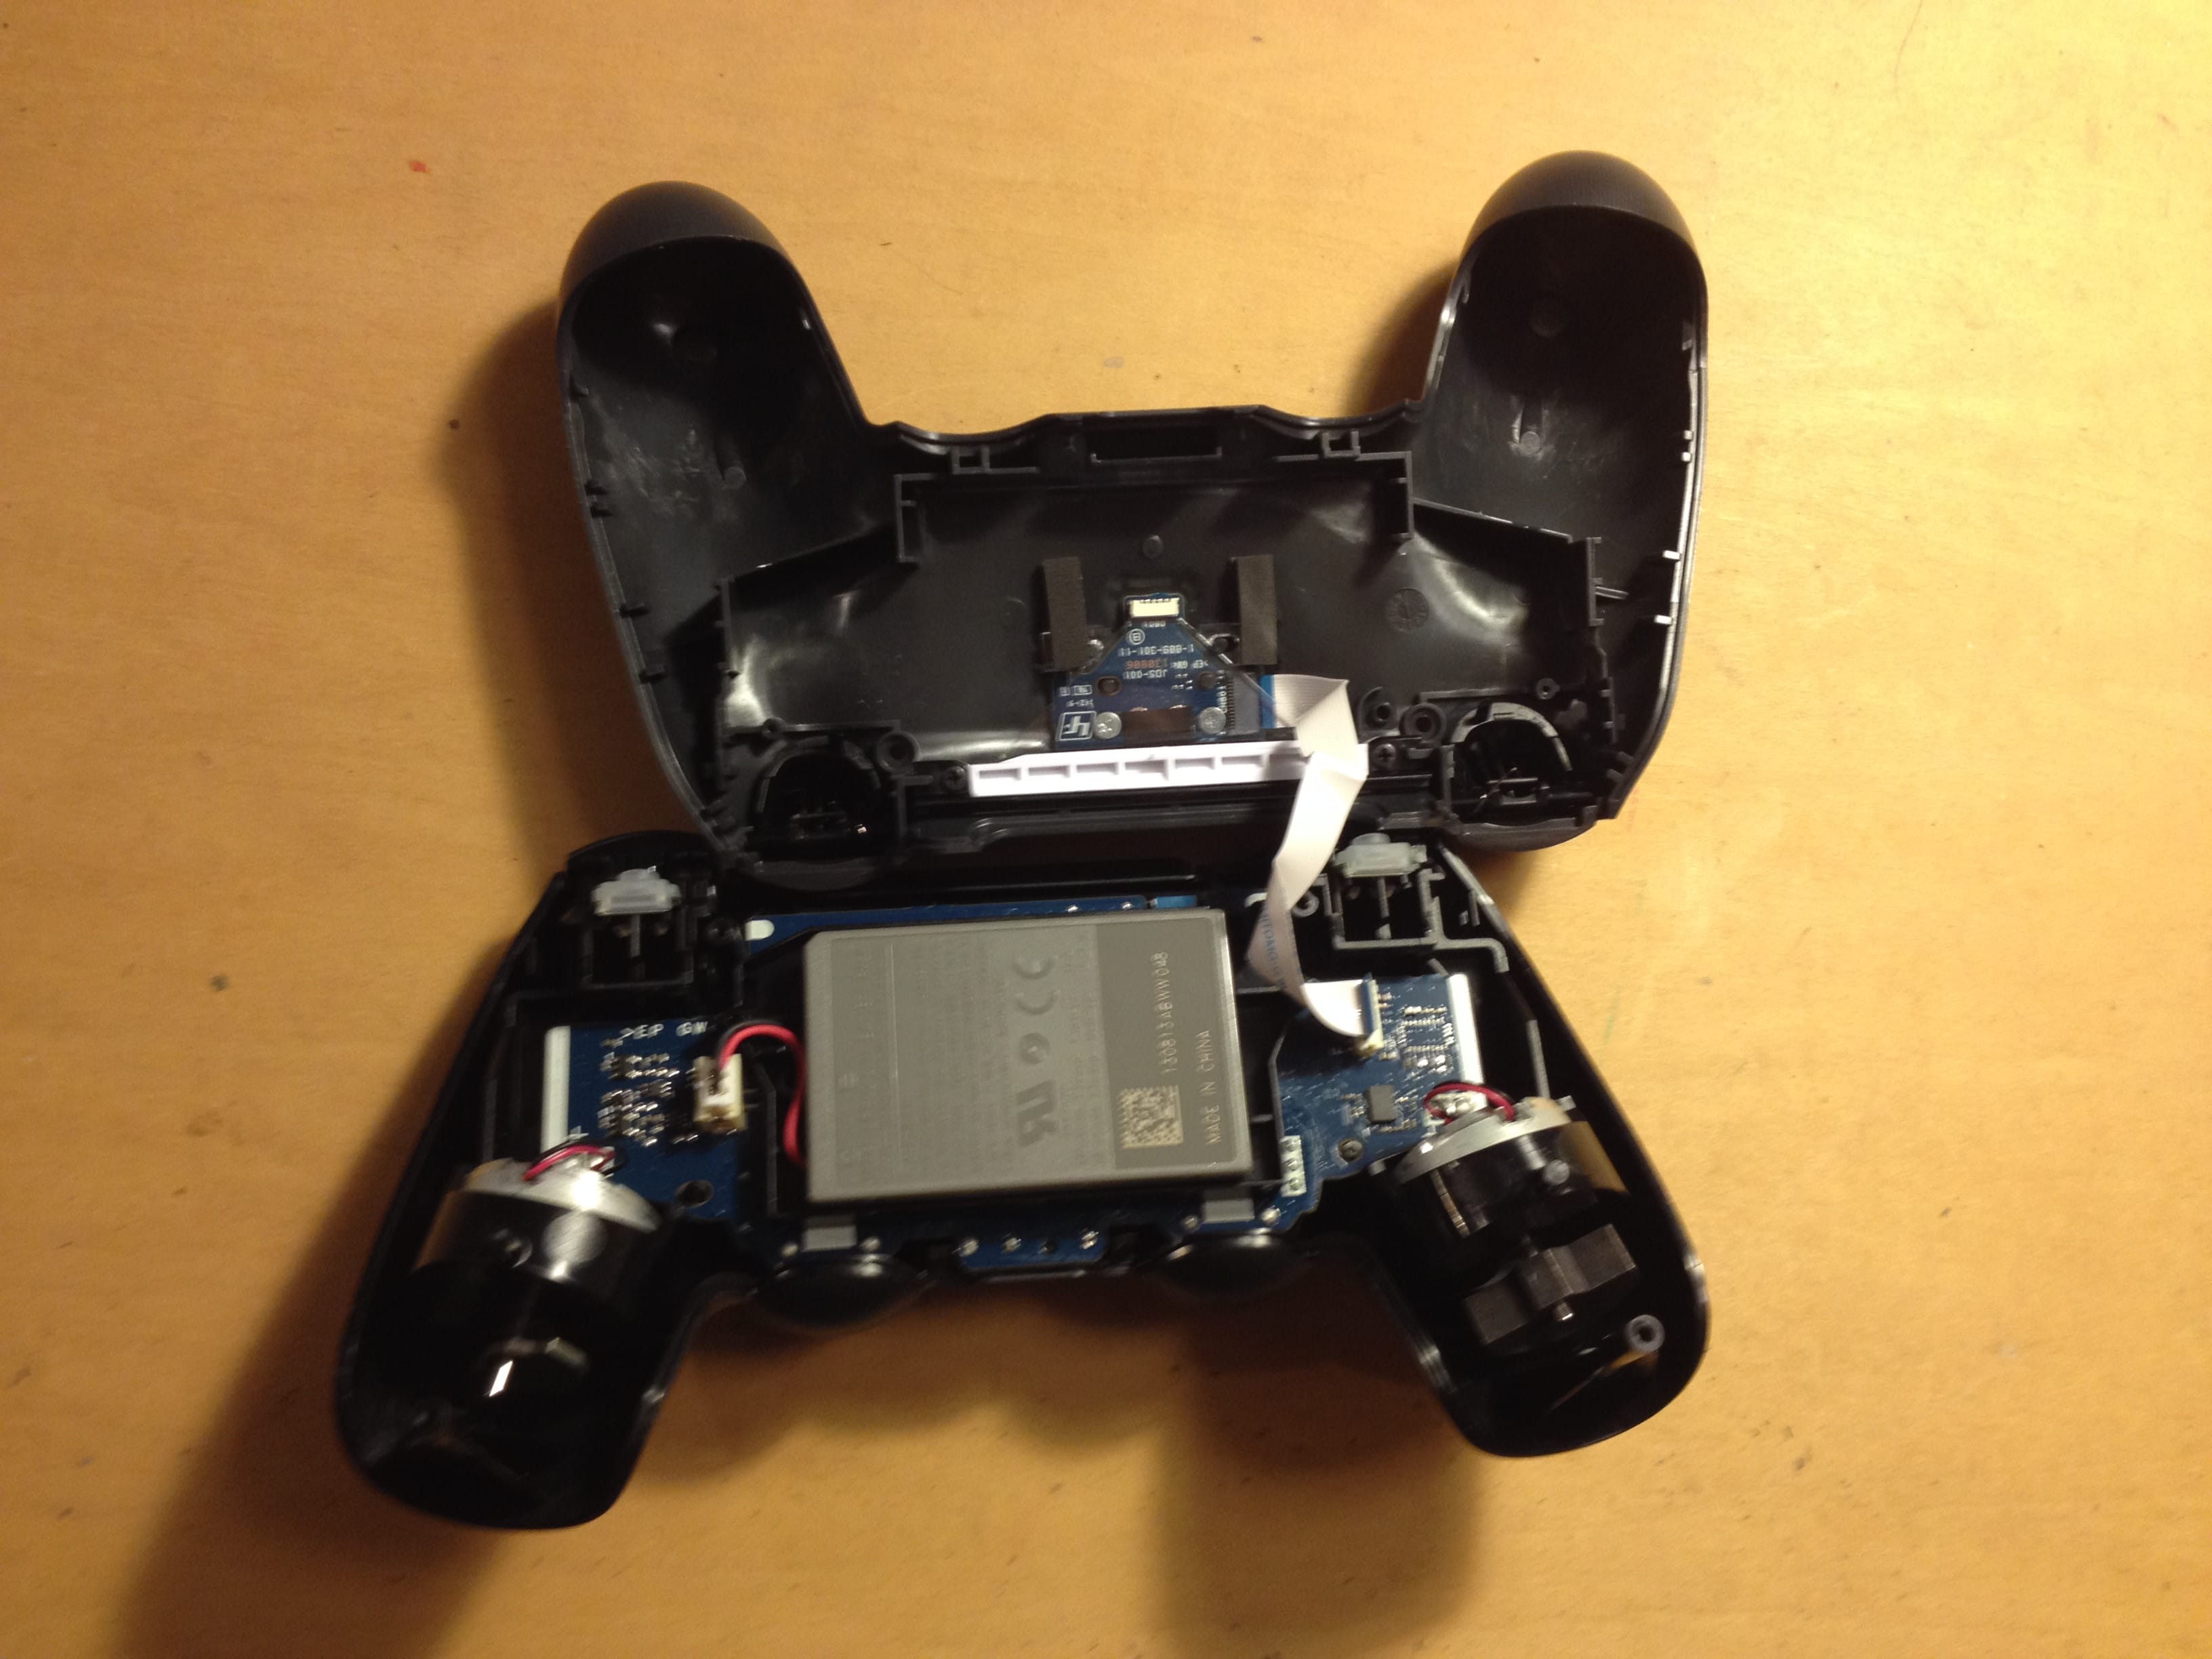 inside of a playstation 4 controller